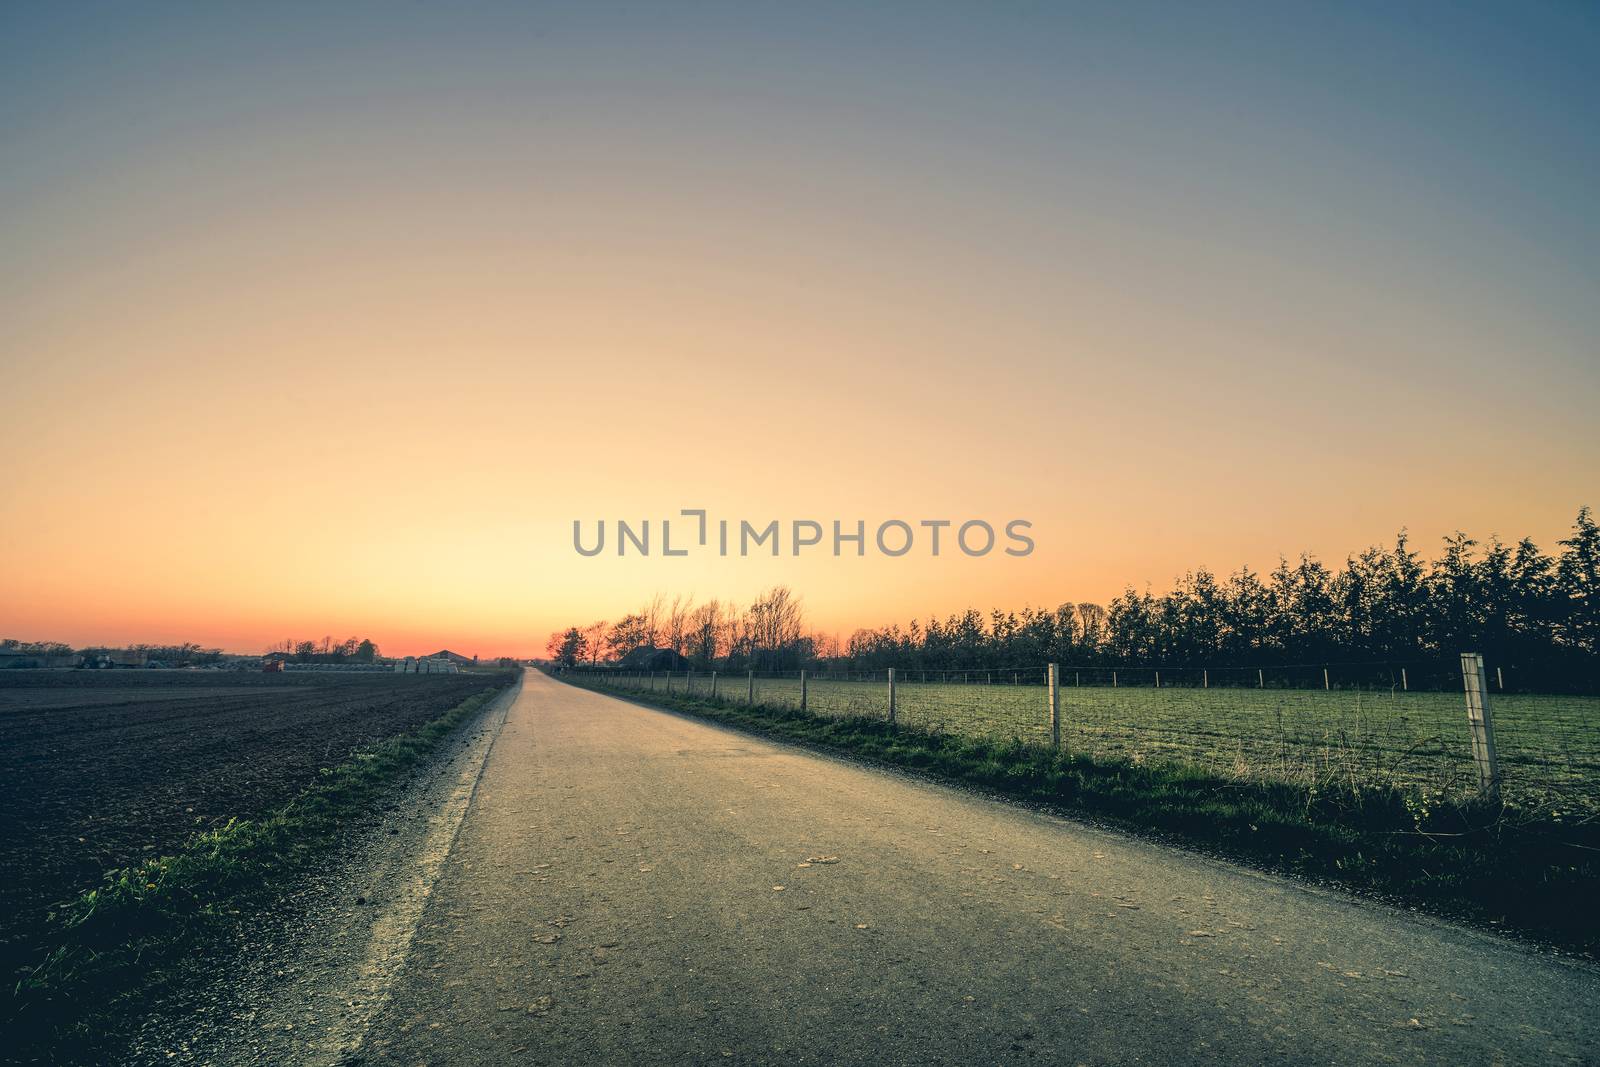 Road to a sunset in a rural environment with a fence on the right side